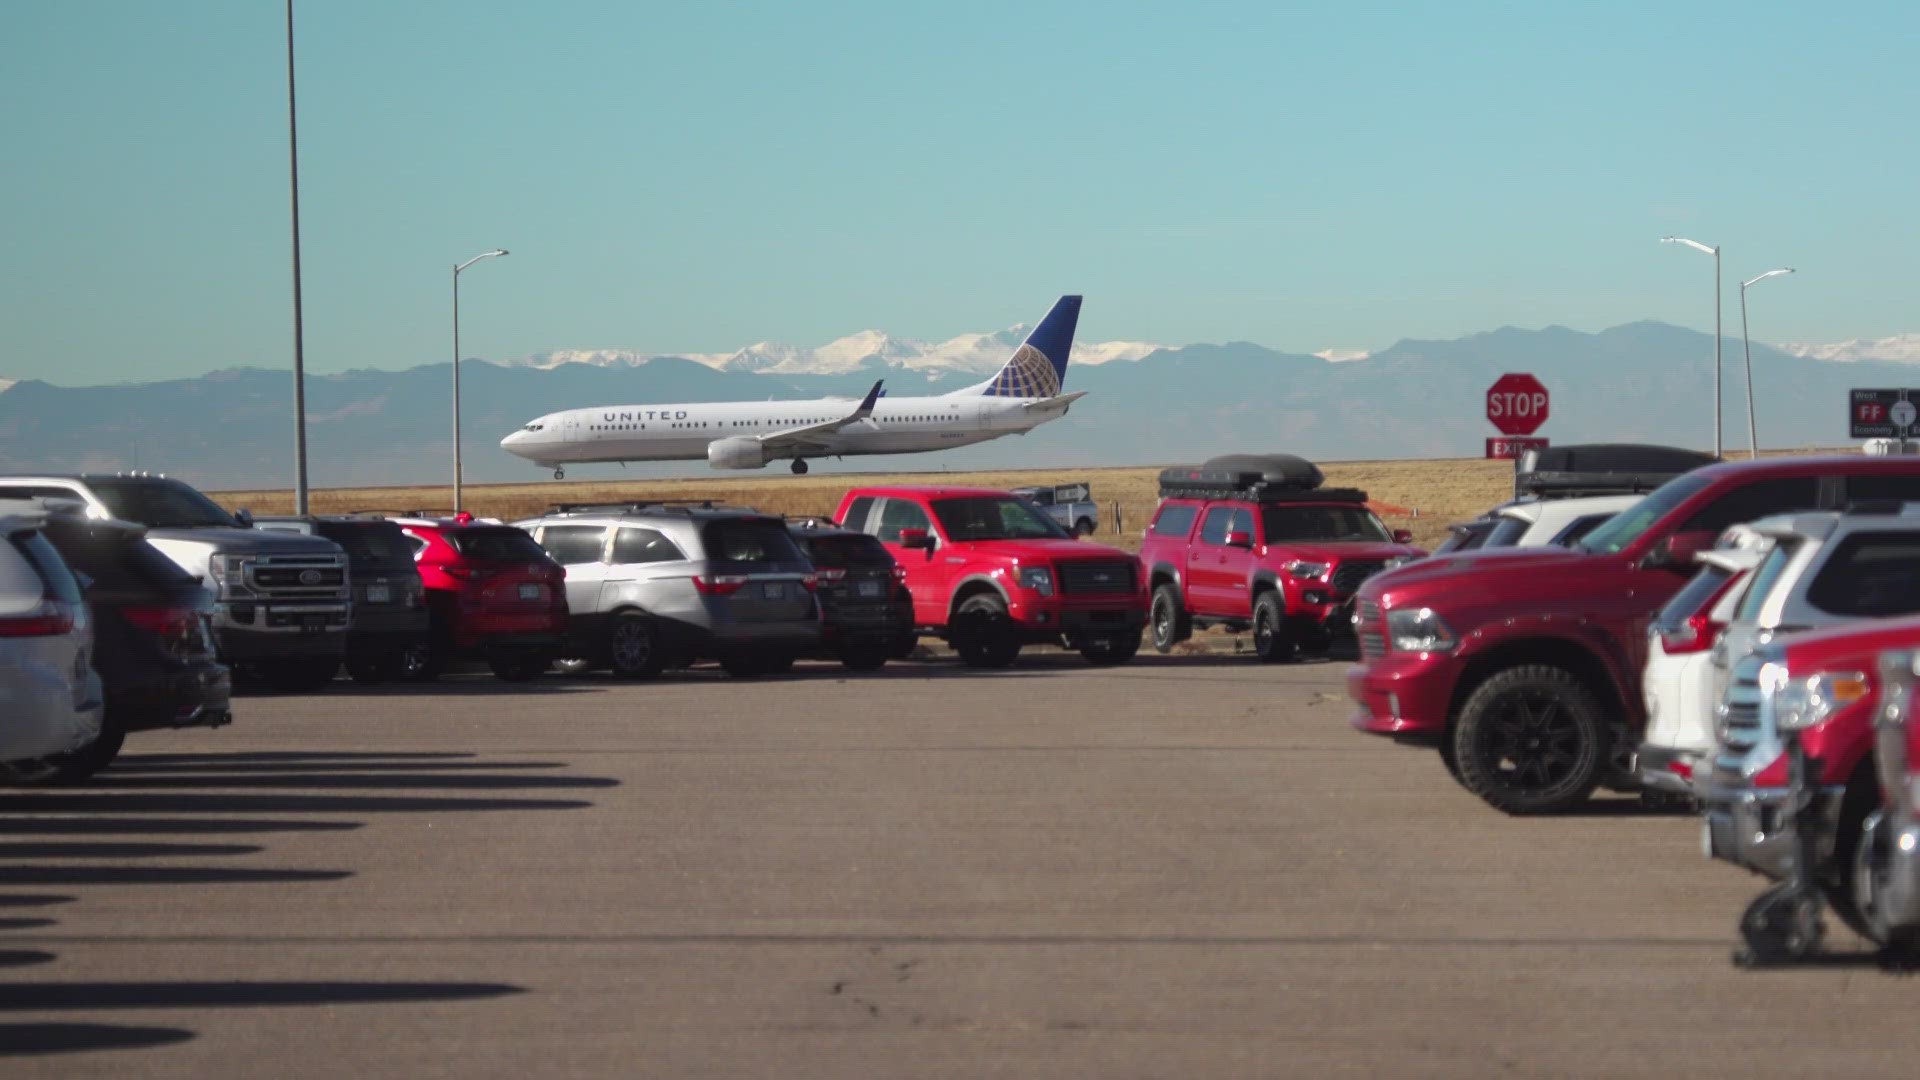 In the last 180 days, police reported 714 cars stolen from DIA. In the last 28 days, police reported 13 cars stolen.